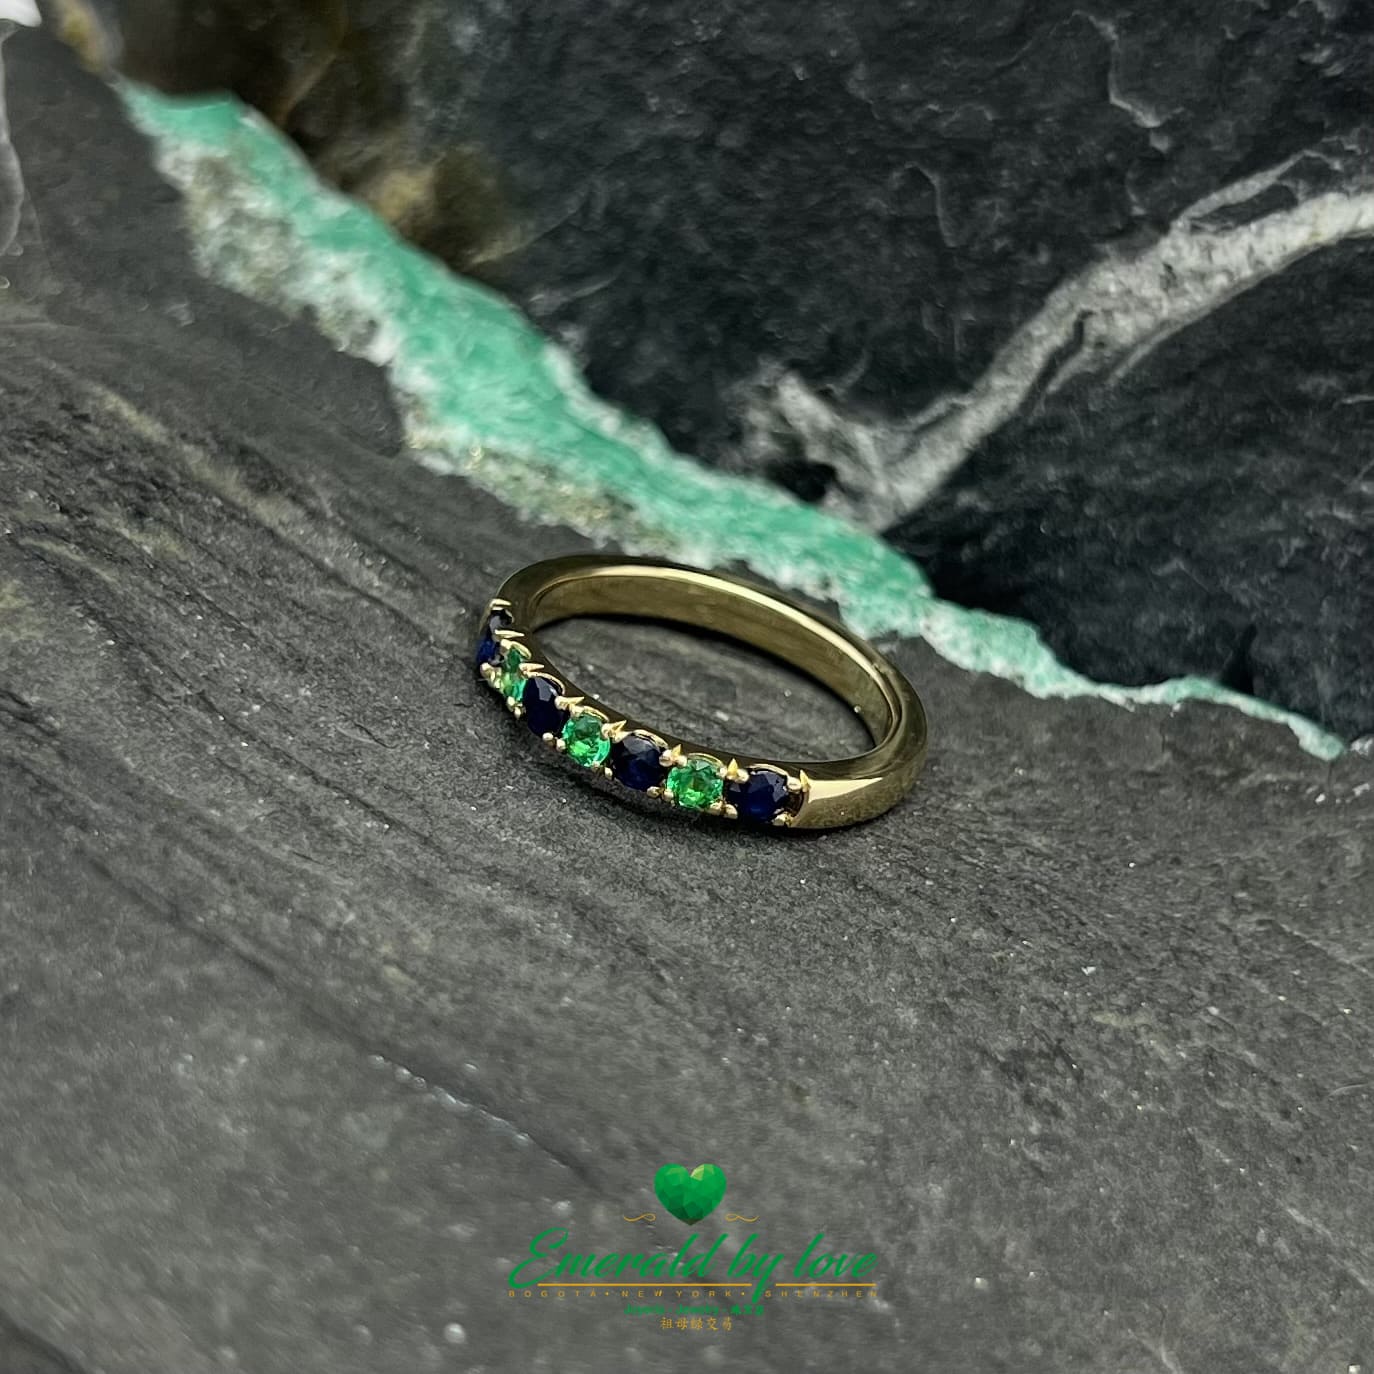 Ethereal Harmony: Yellow Gold Band Ring with Emeralds and Sapphires